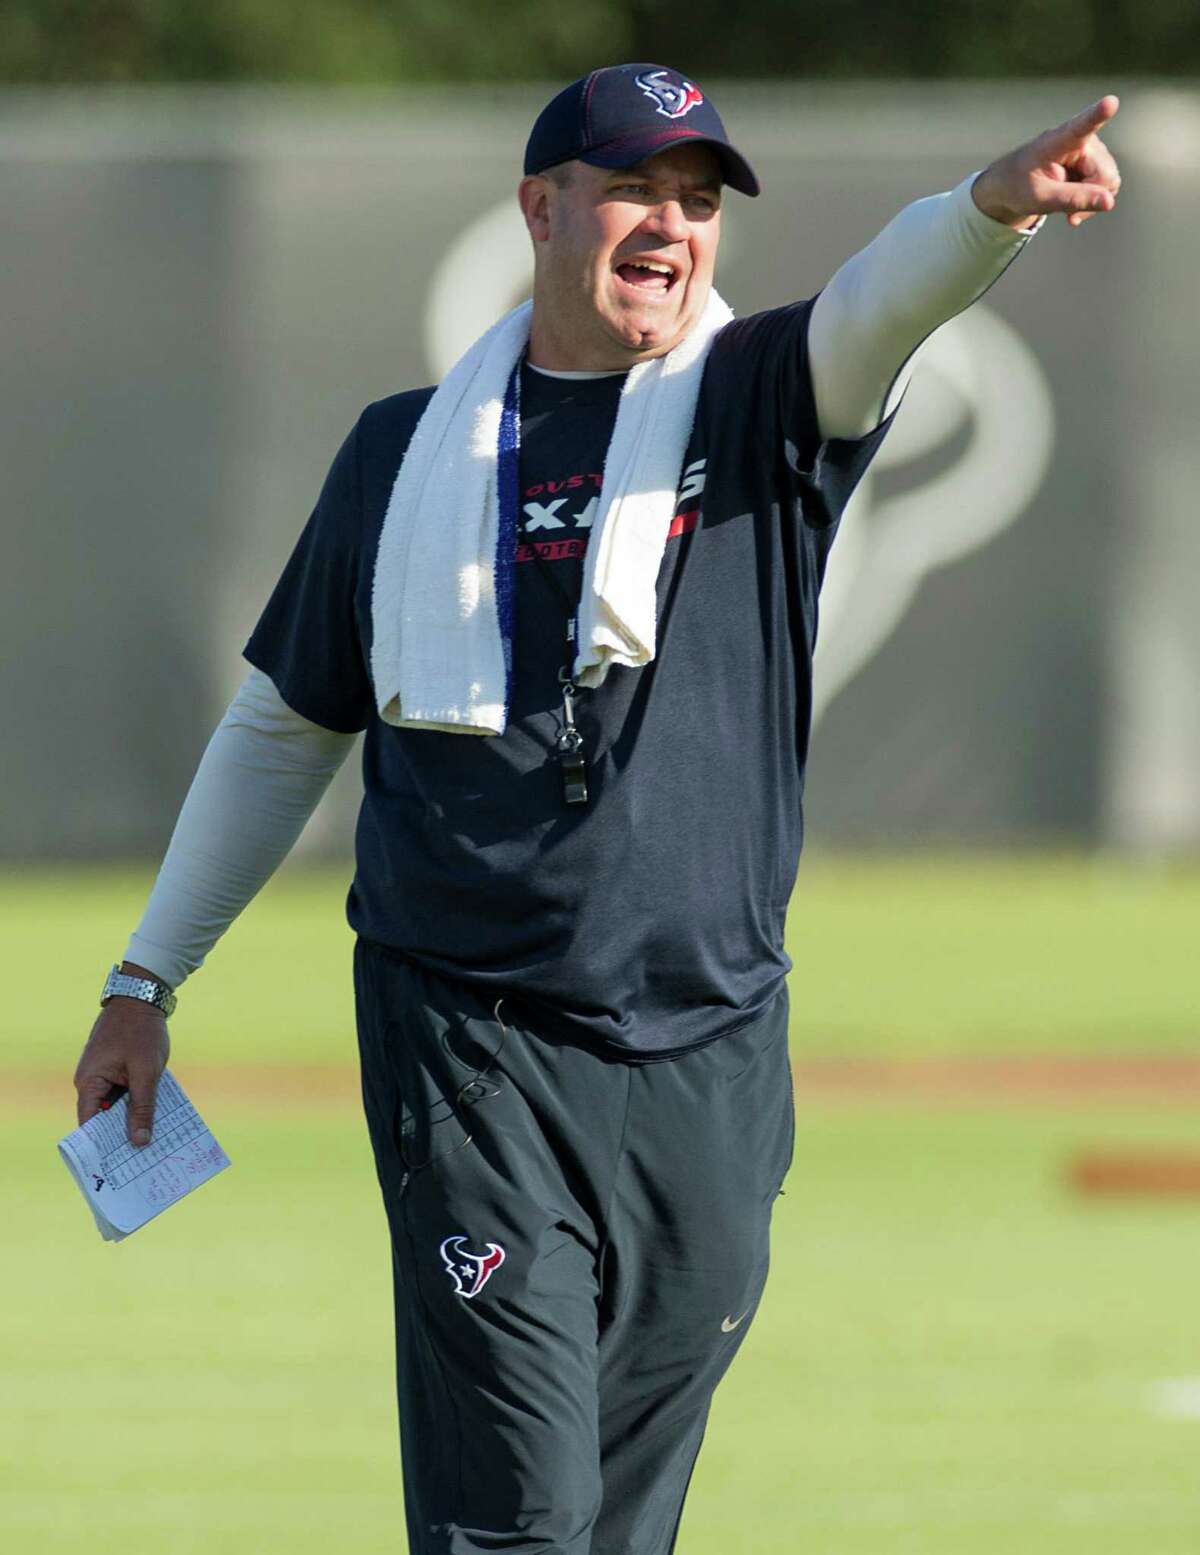 Coach Bill O'Brien hopes the Texans' commendable work ethic in practice translates to the playing field, starting Sunday.